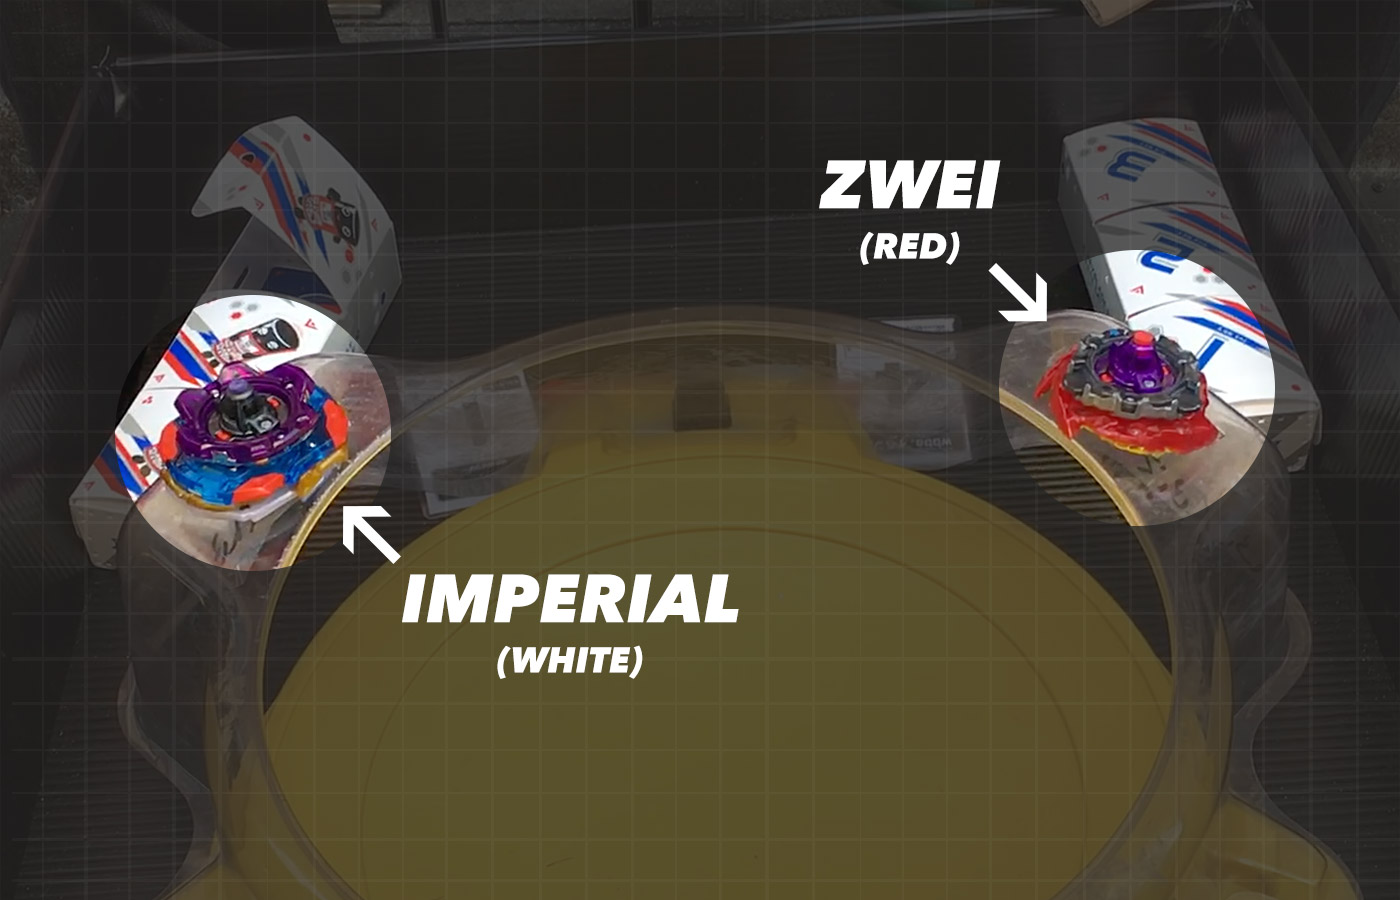 Screenshot of Beyblade battle video illustrating which Beyblade is Imperial and which is Zwei